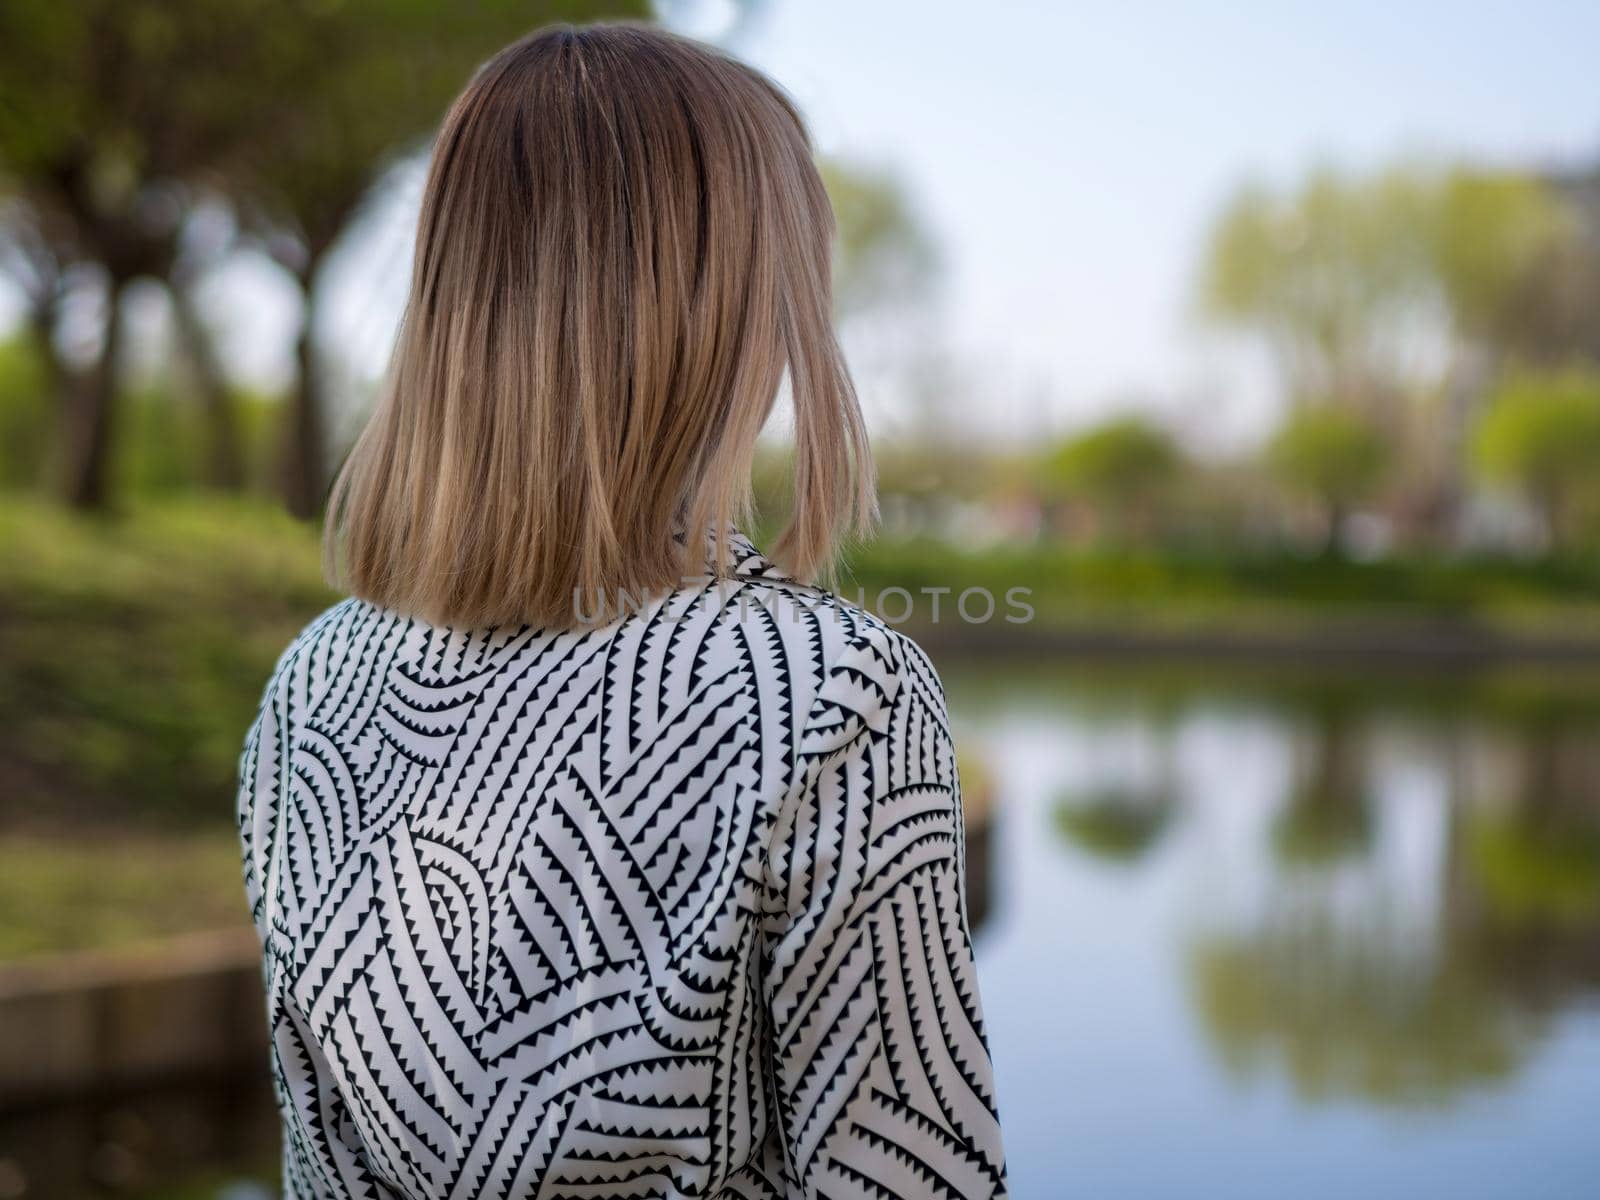 stylish blonde woman in a black and white cloak by the lake in the park by Andre1ns